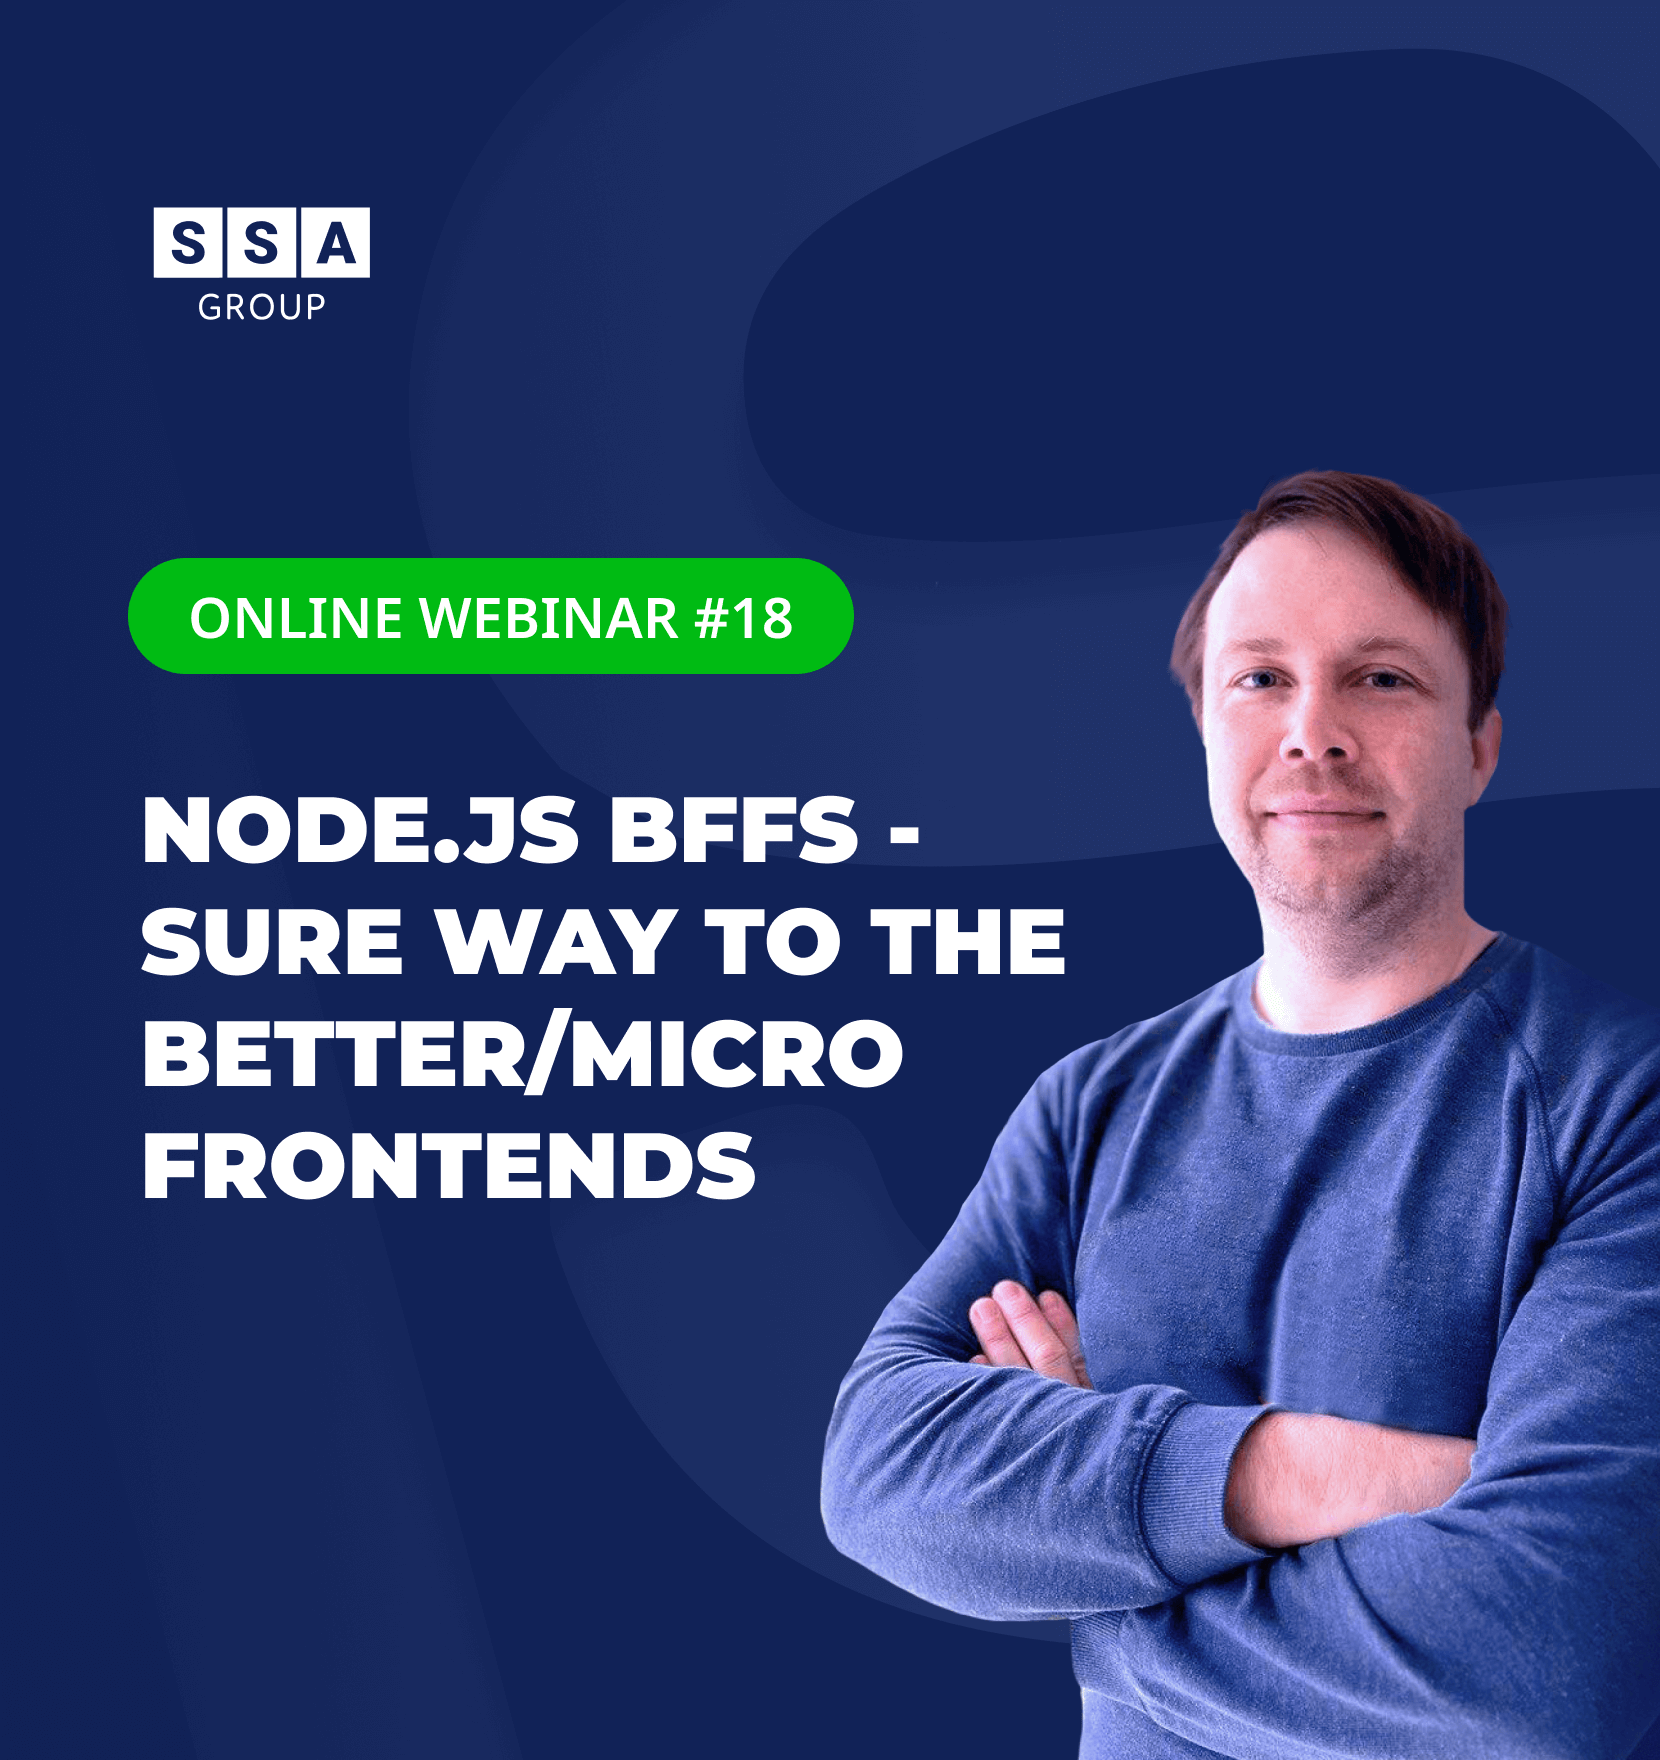 Node.js BFFs – sure way to the better/micro frontends